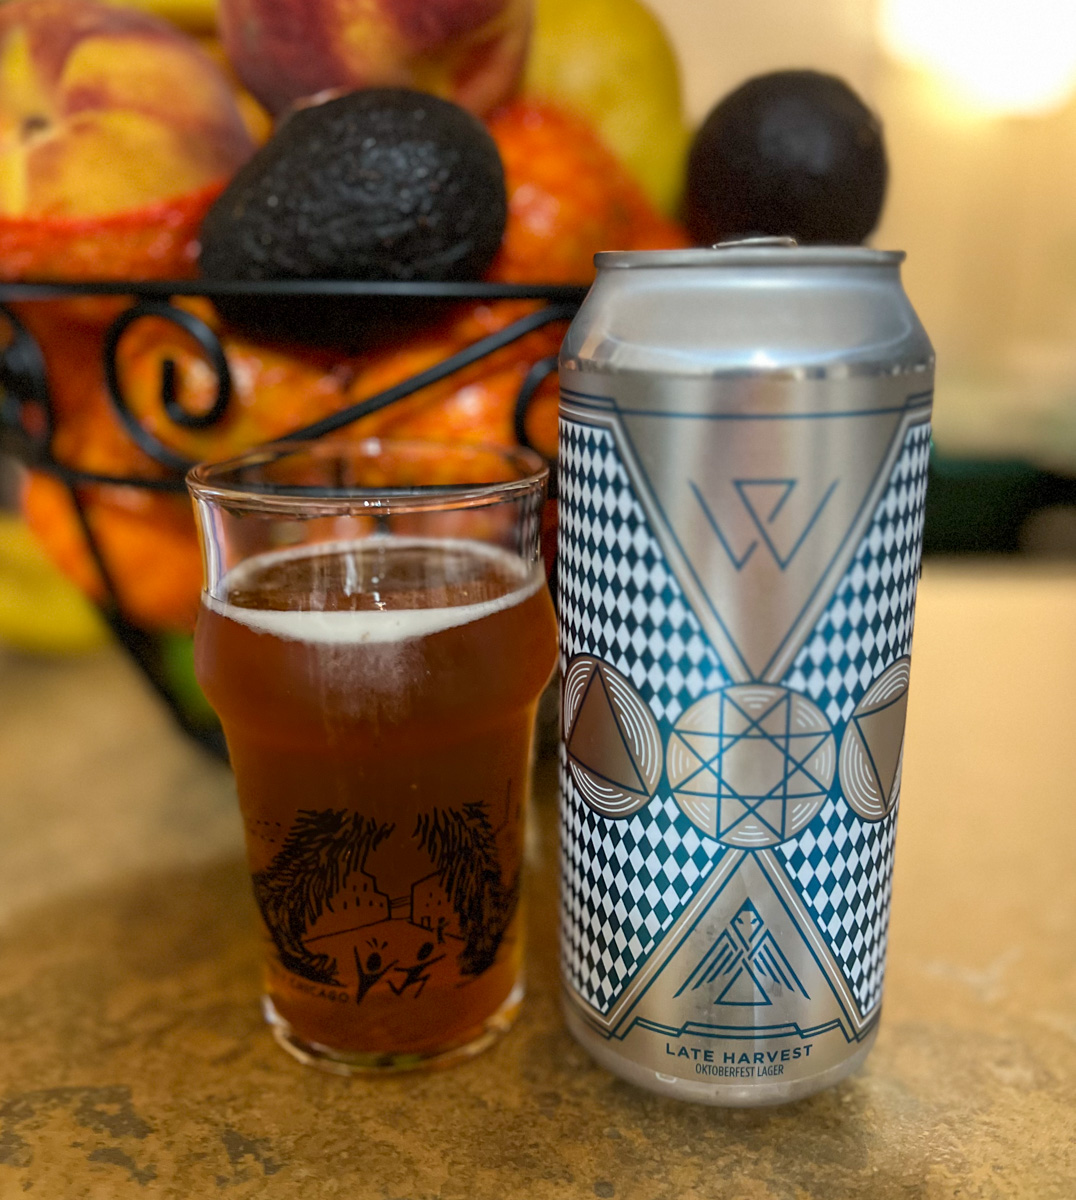 Late Harvest - Woven Water Brewing Company | ViewFromALove